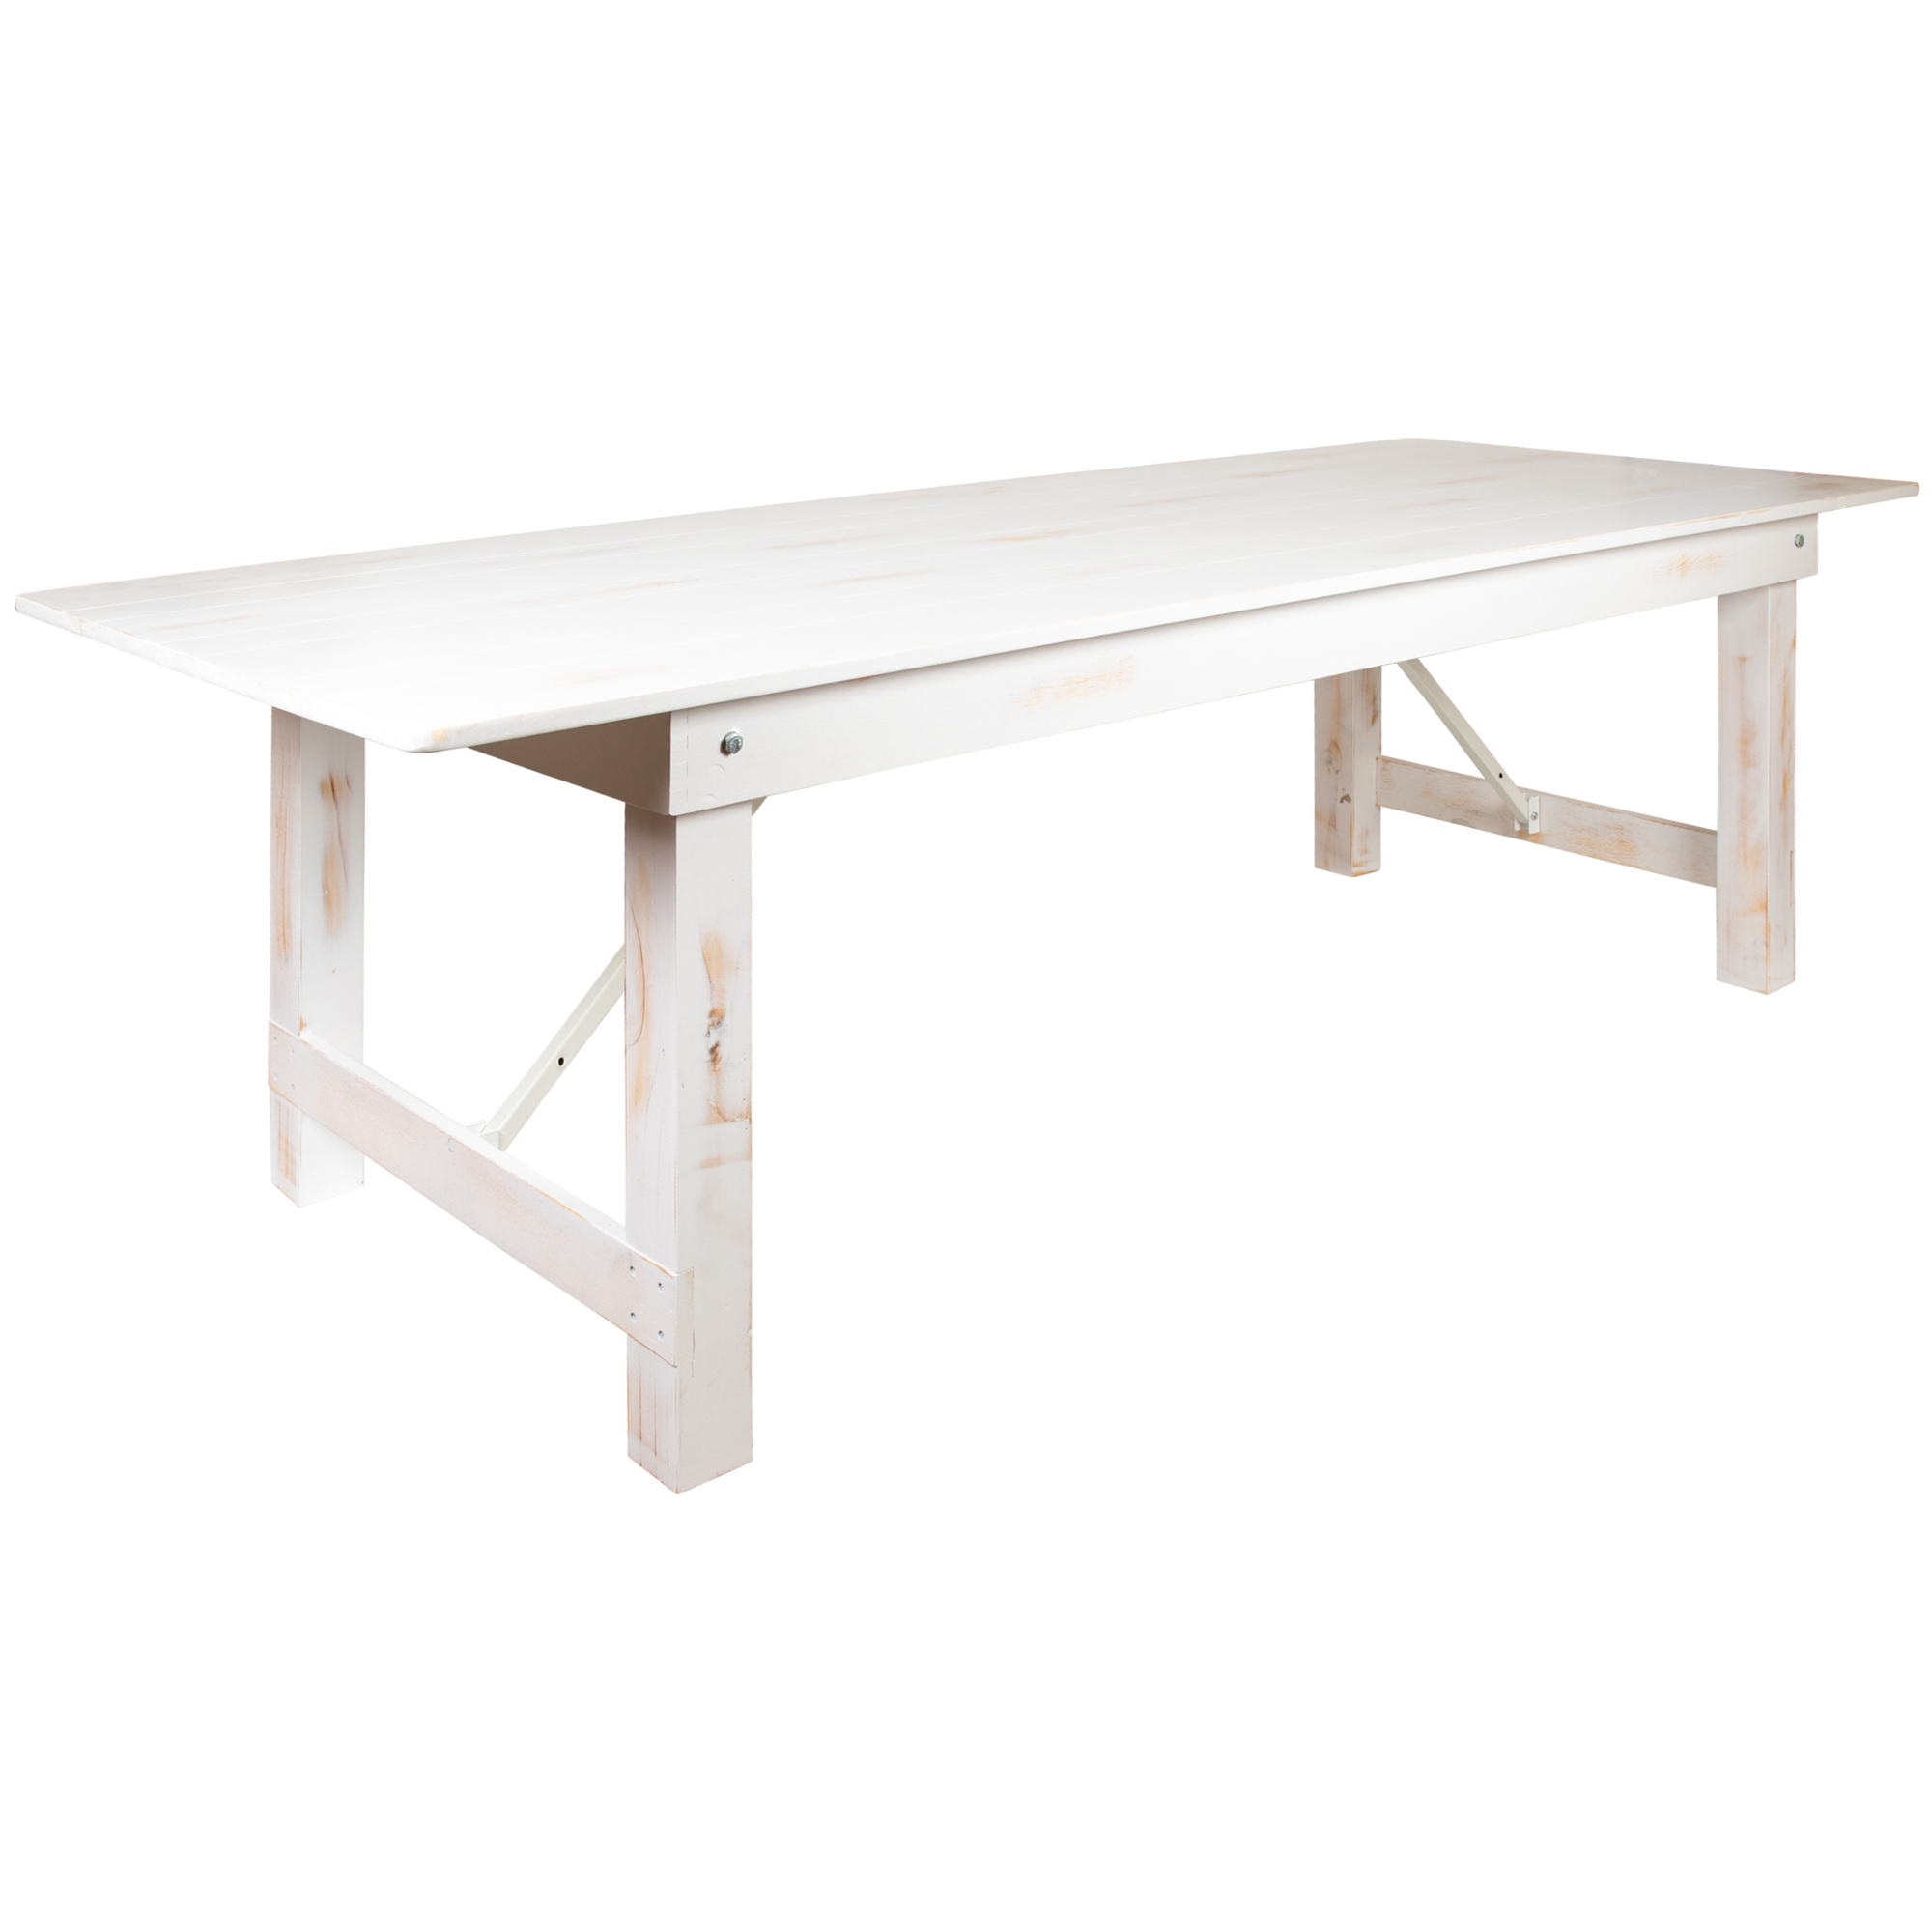 Flash Furniture, 9ft.x40Inch Antique White Solid Pine Folding Farm Table, Height 30 in, Width 40.25 in, Length 108 in, Model XAF108X40WH